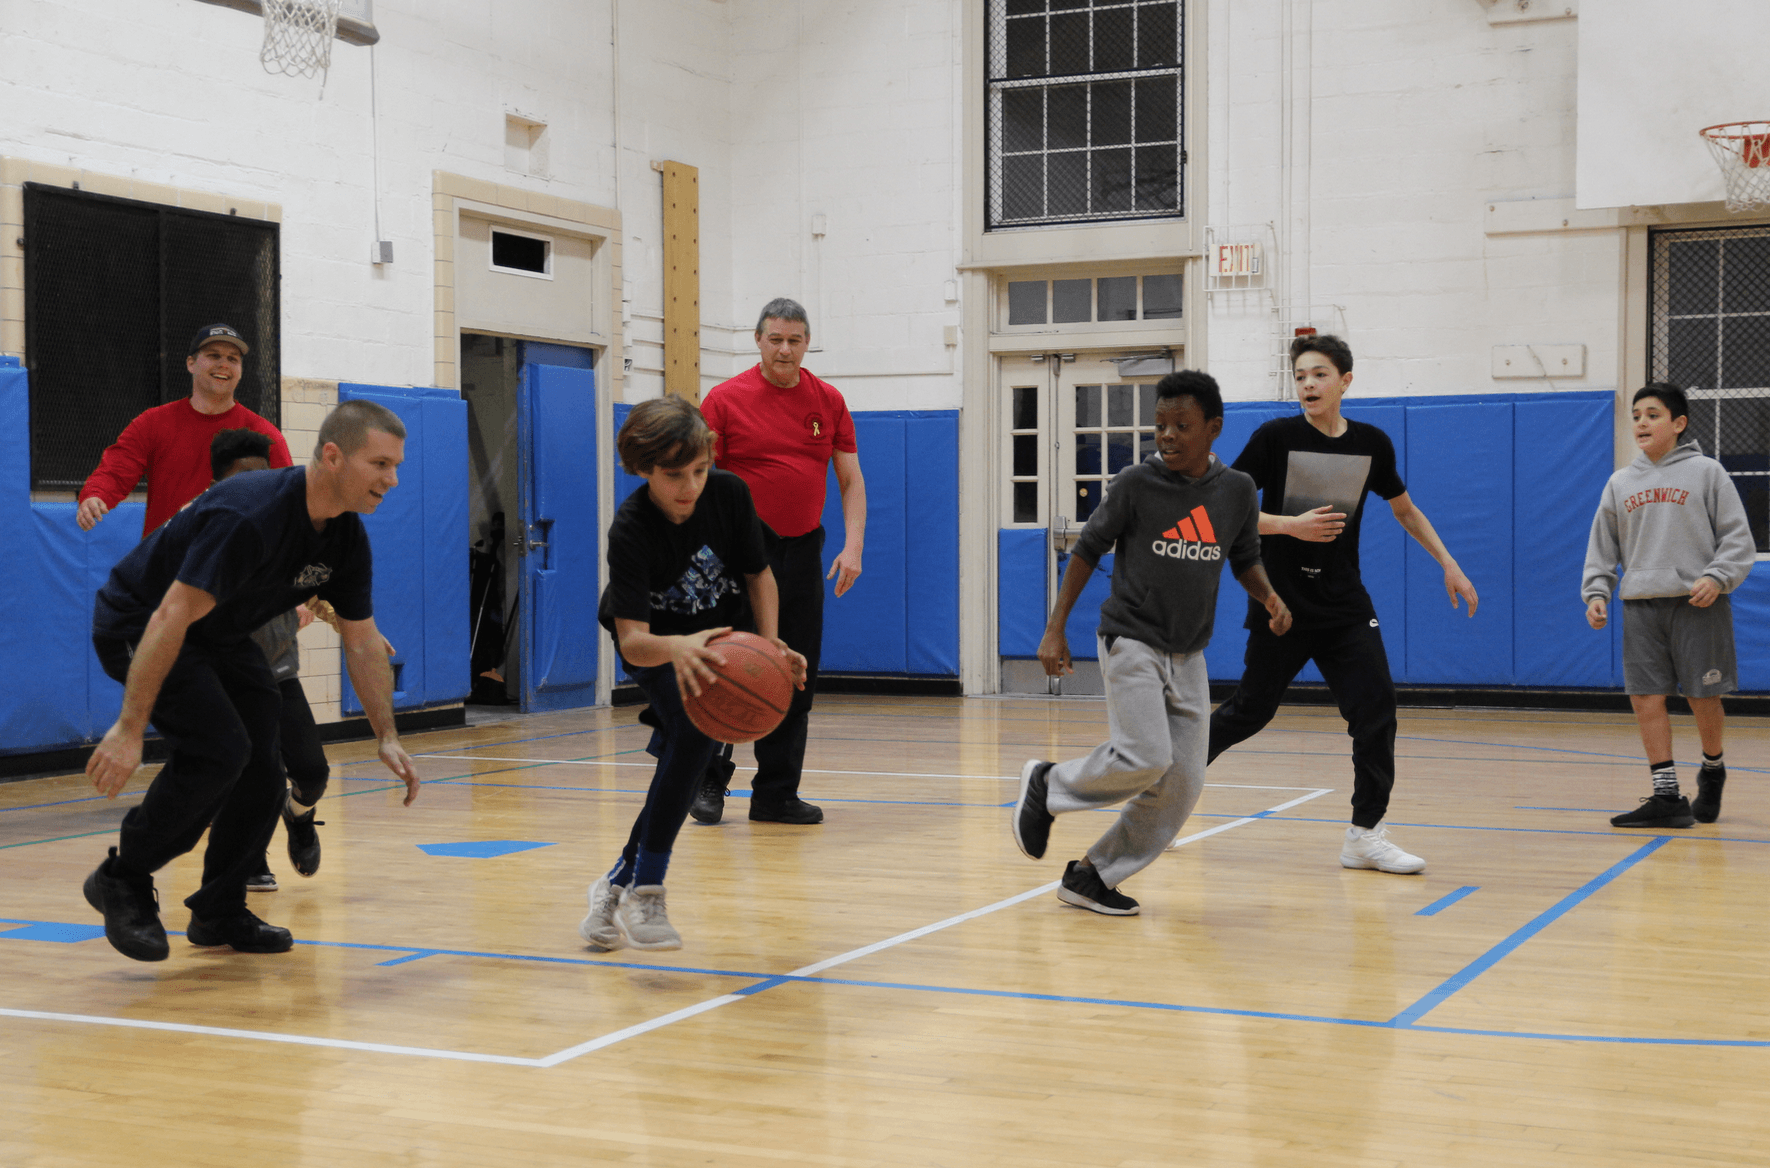 At the Boys & Girls Club of Greenwich, about 80 middle schoolers had a fun Friday night that included members of the Greenwich Fire Dept. Dec 8, 2017. Photo: Leslie Yager